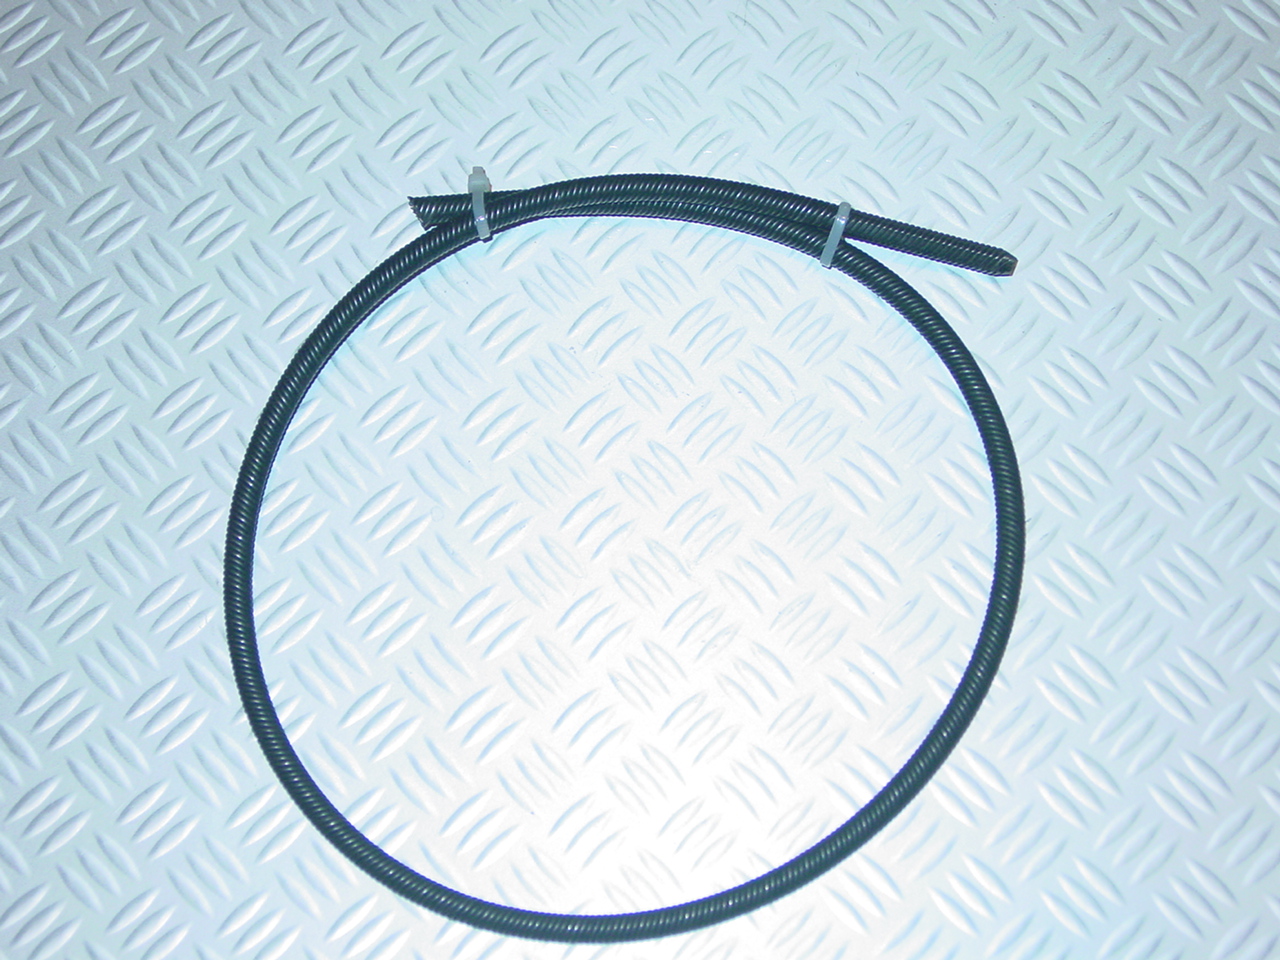 ¼” flex cable,36” long , one end squared.